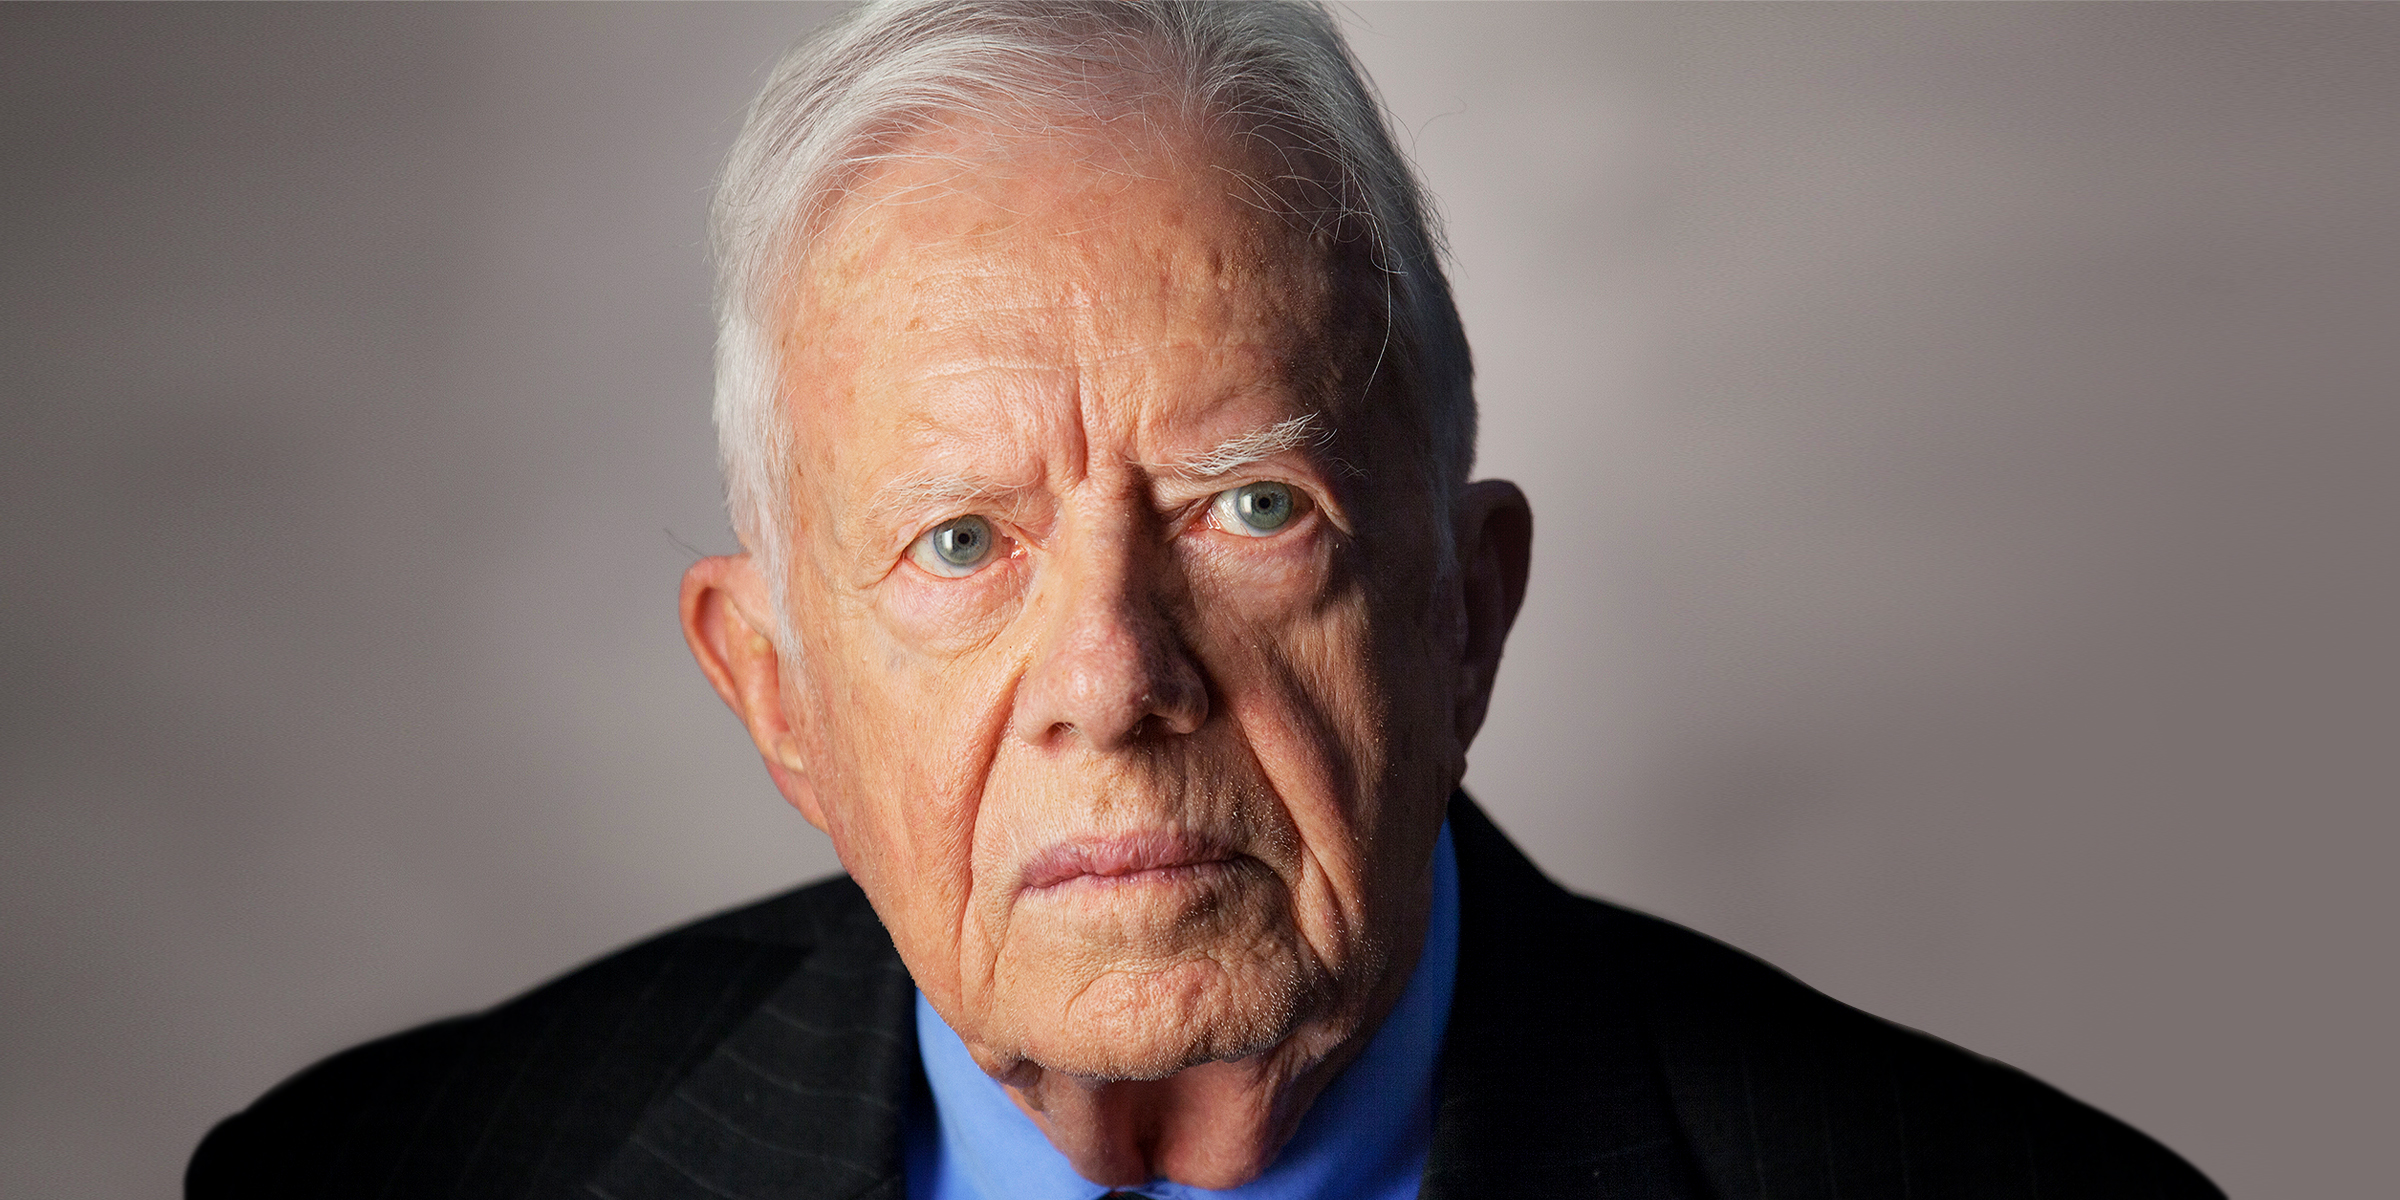 Jimmy Carter | Source: Getty Images